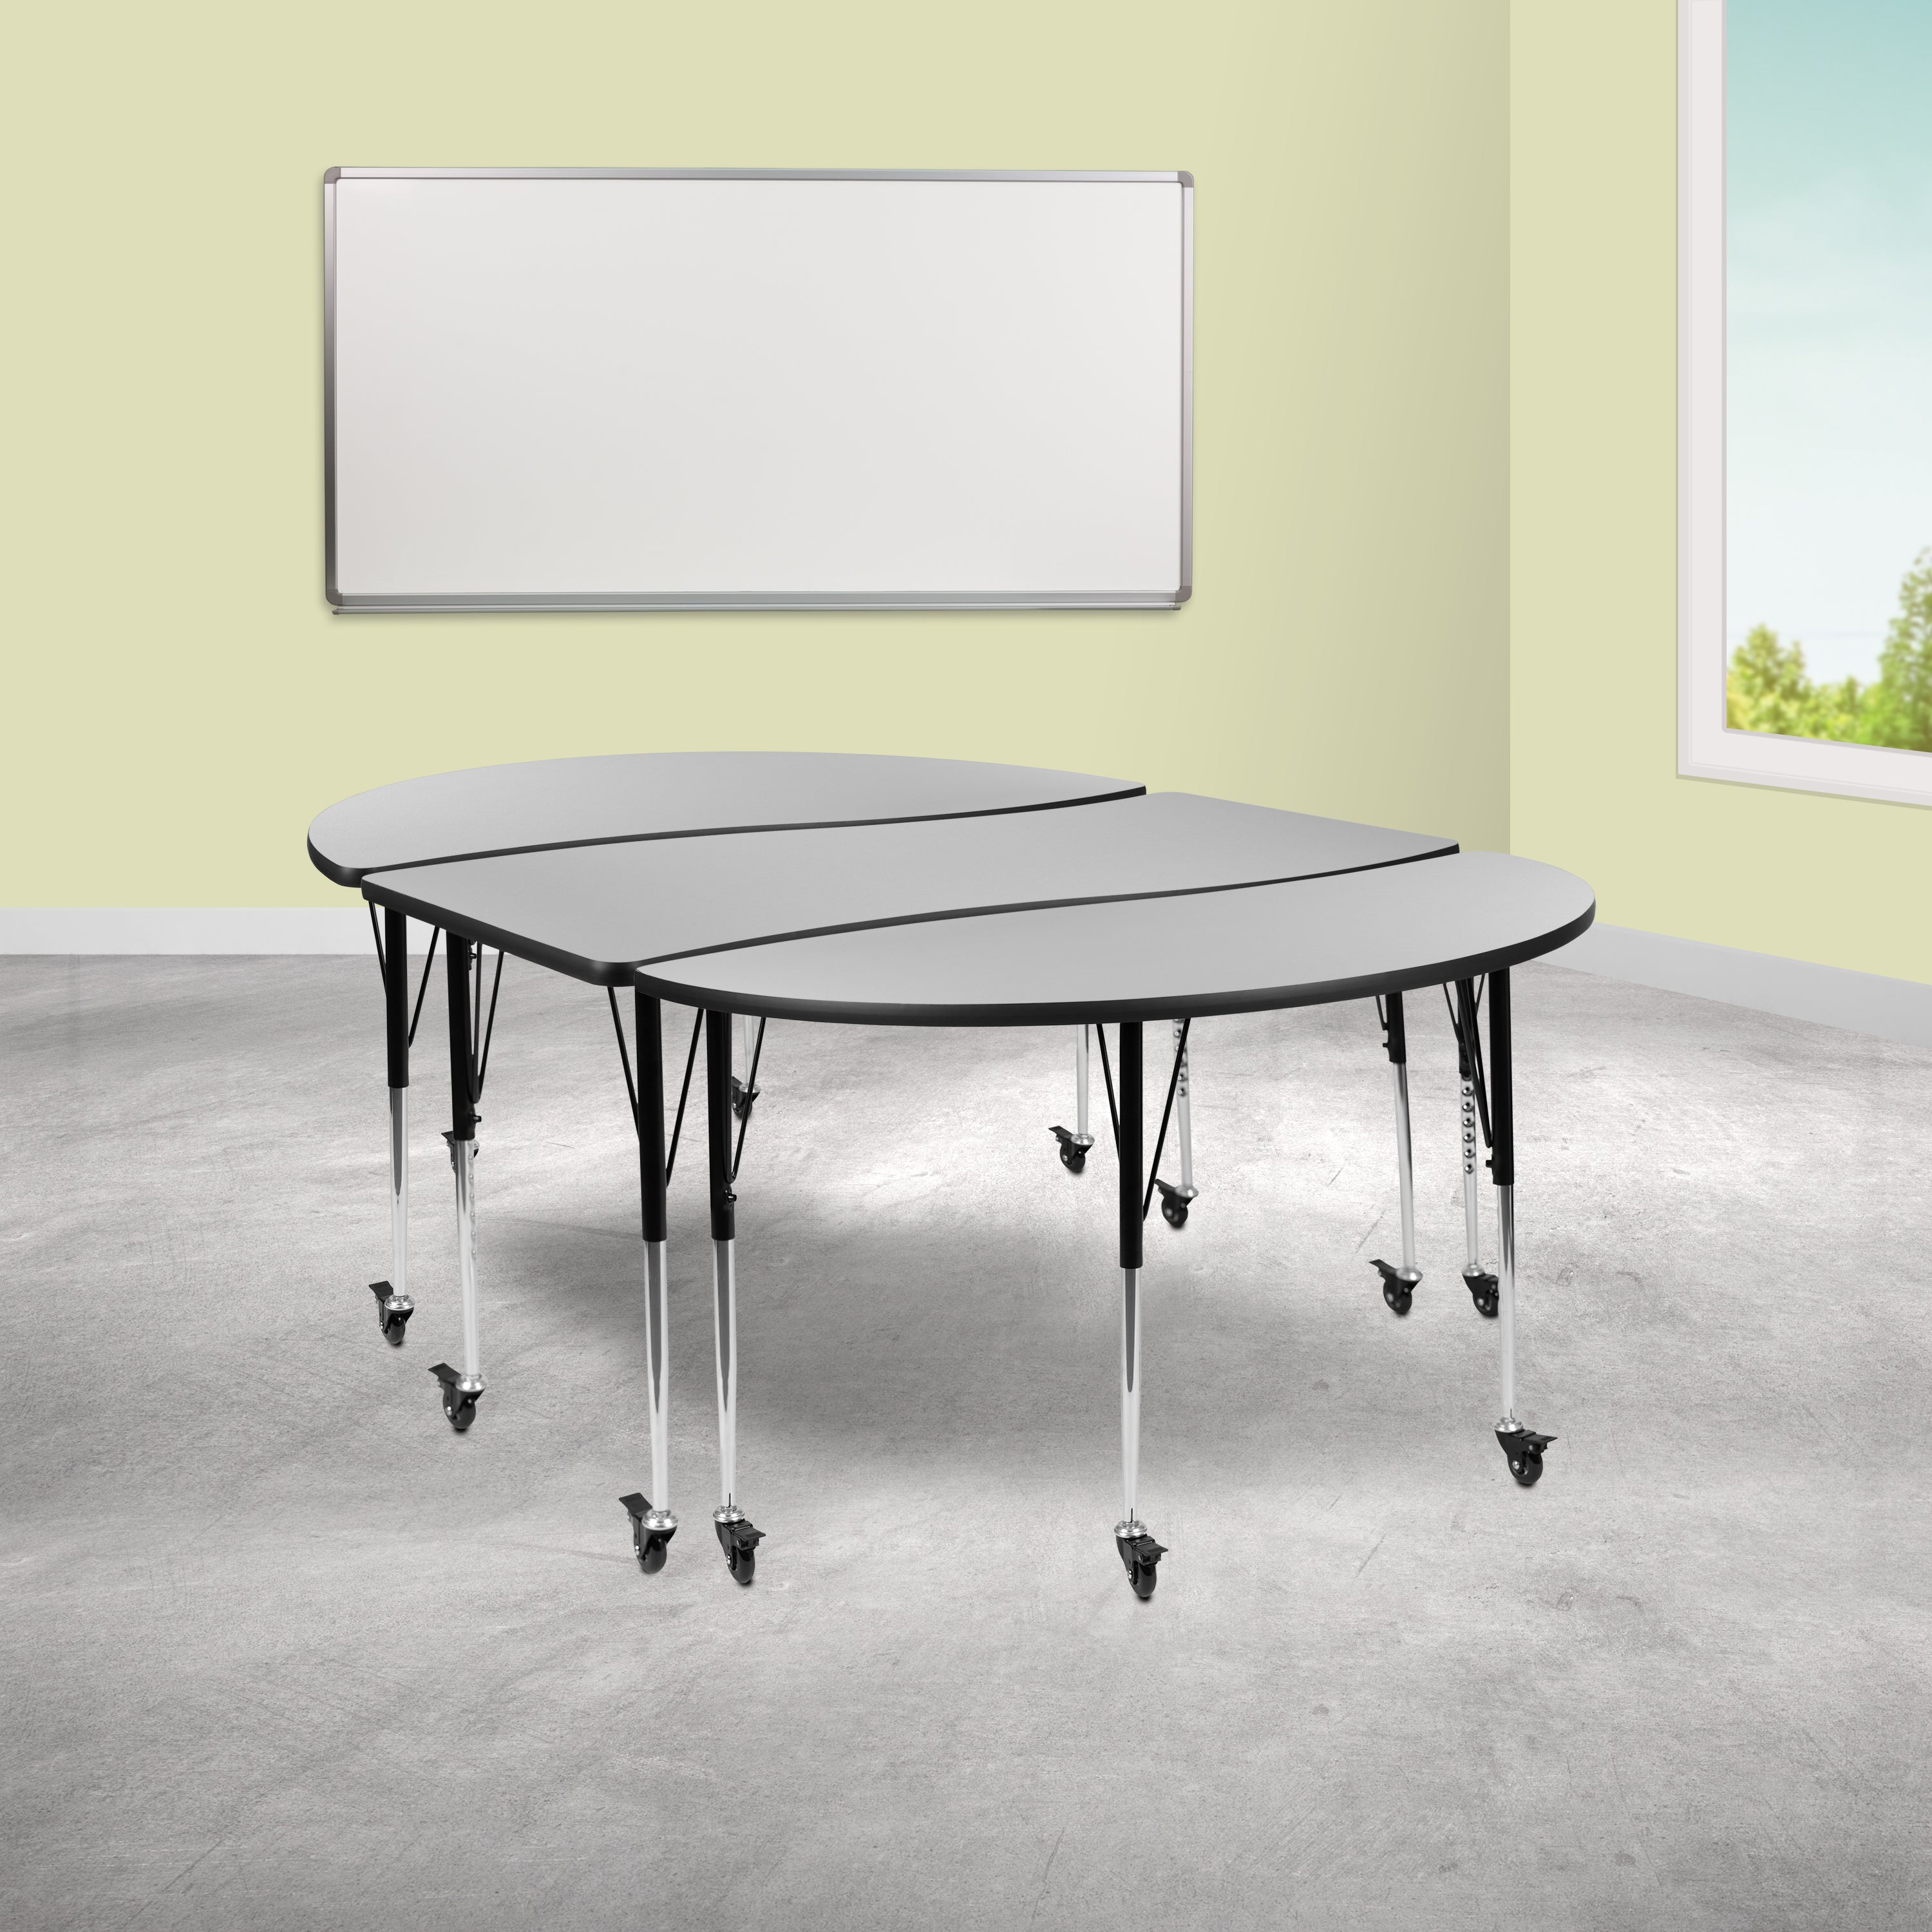 3 Mobile Piece 86" Oval Wave Flexible Grey Thermal Laminate Activity Table Set - Standard Height Adjustable Legs-Collaborative Activity Table Set-Flash Furniture-Wall2Wall Furnishings